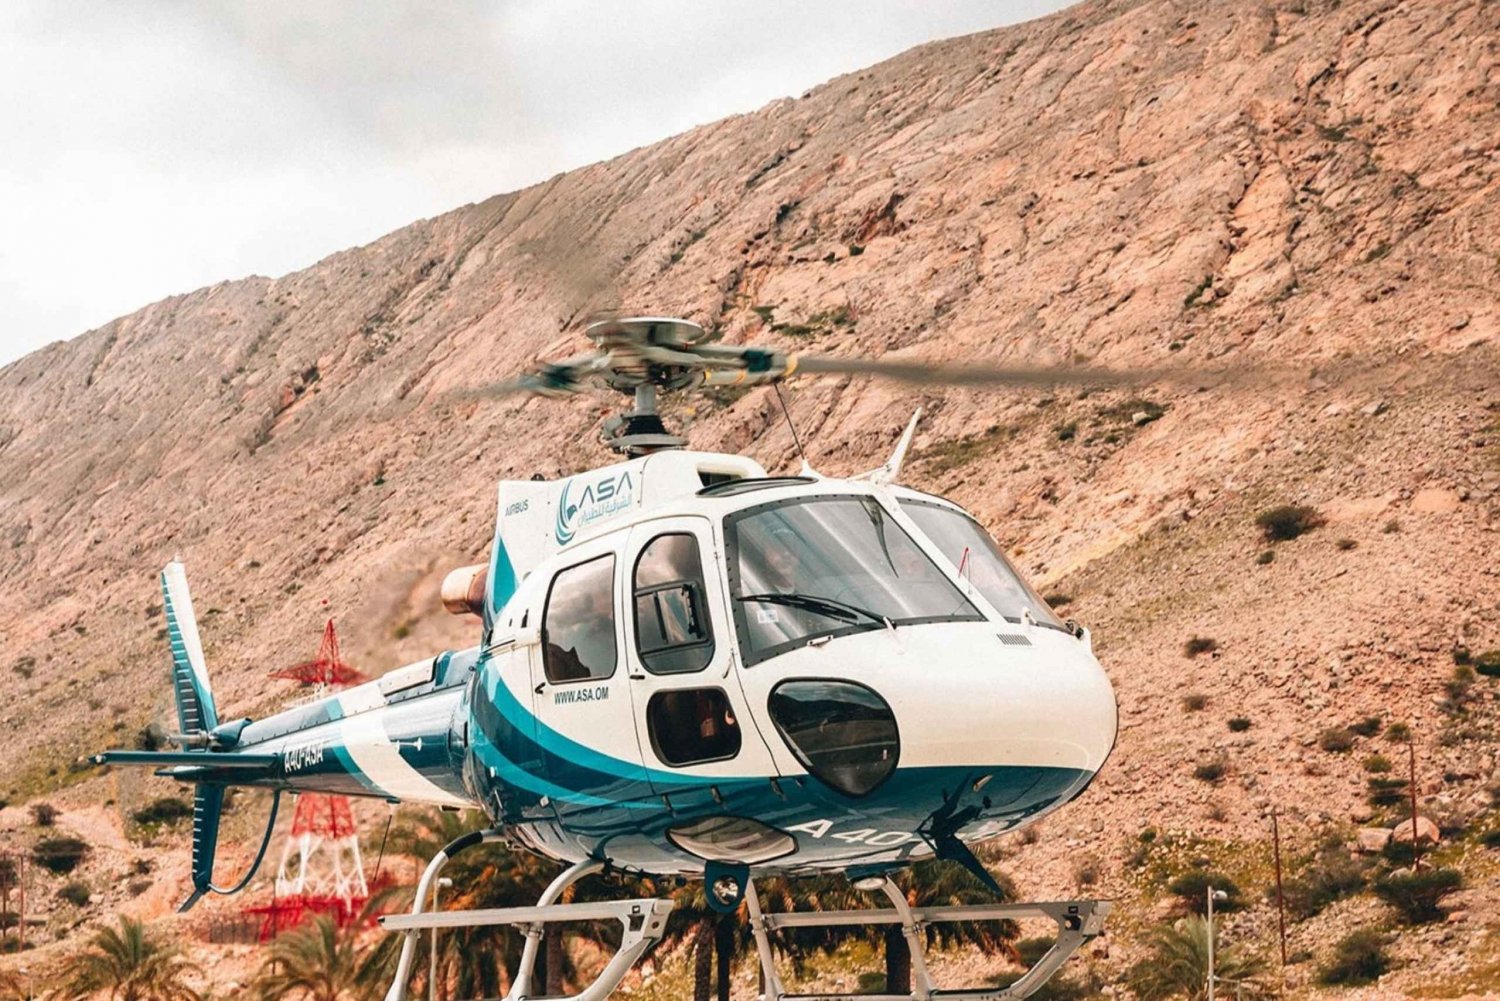 Muscat Helicopter Tour